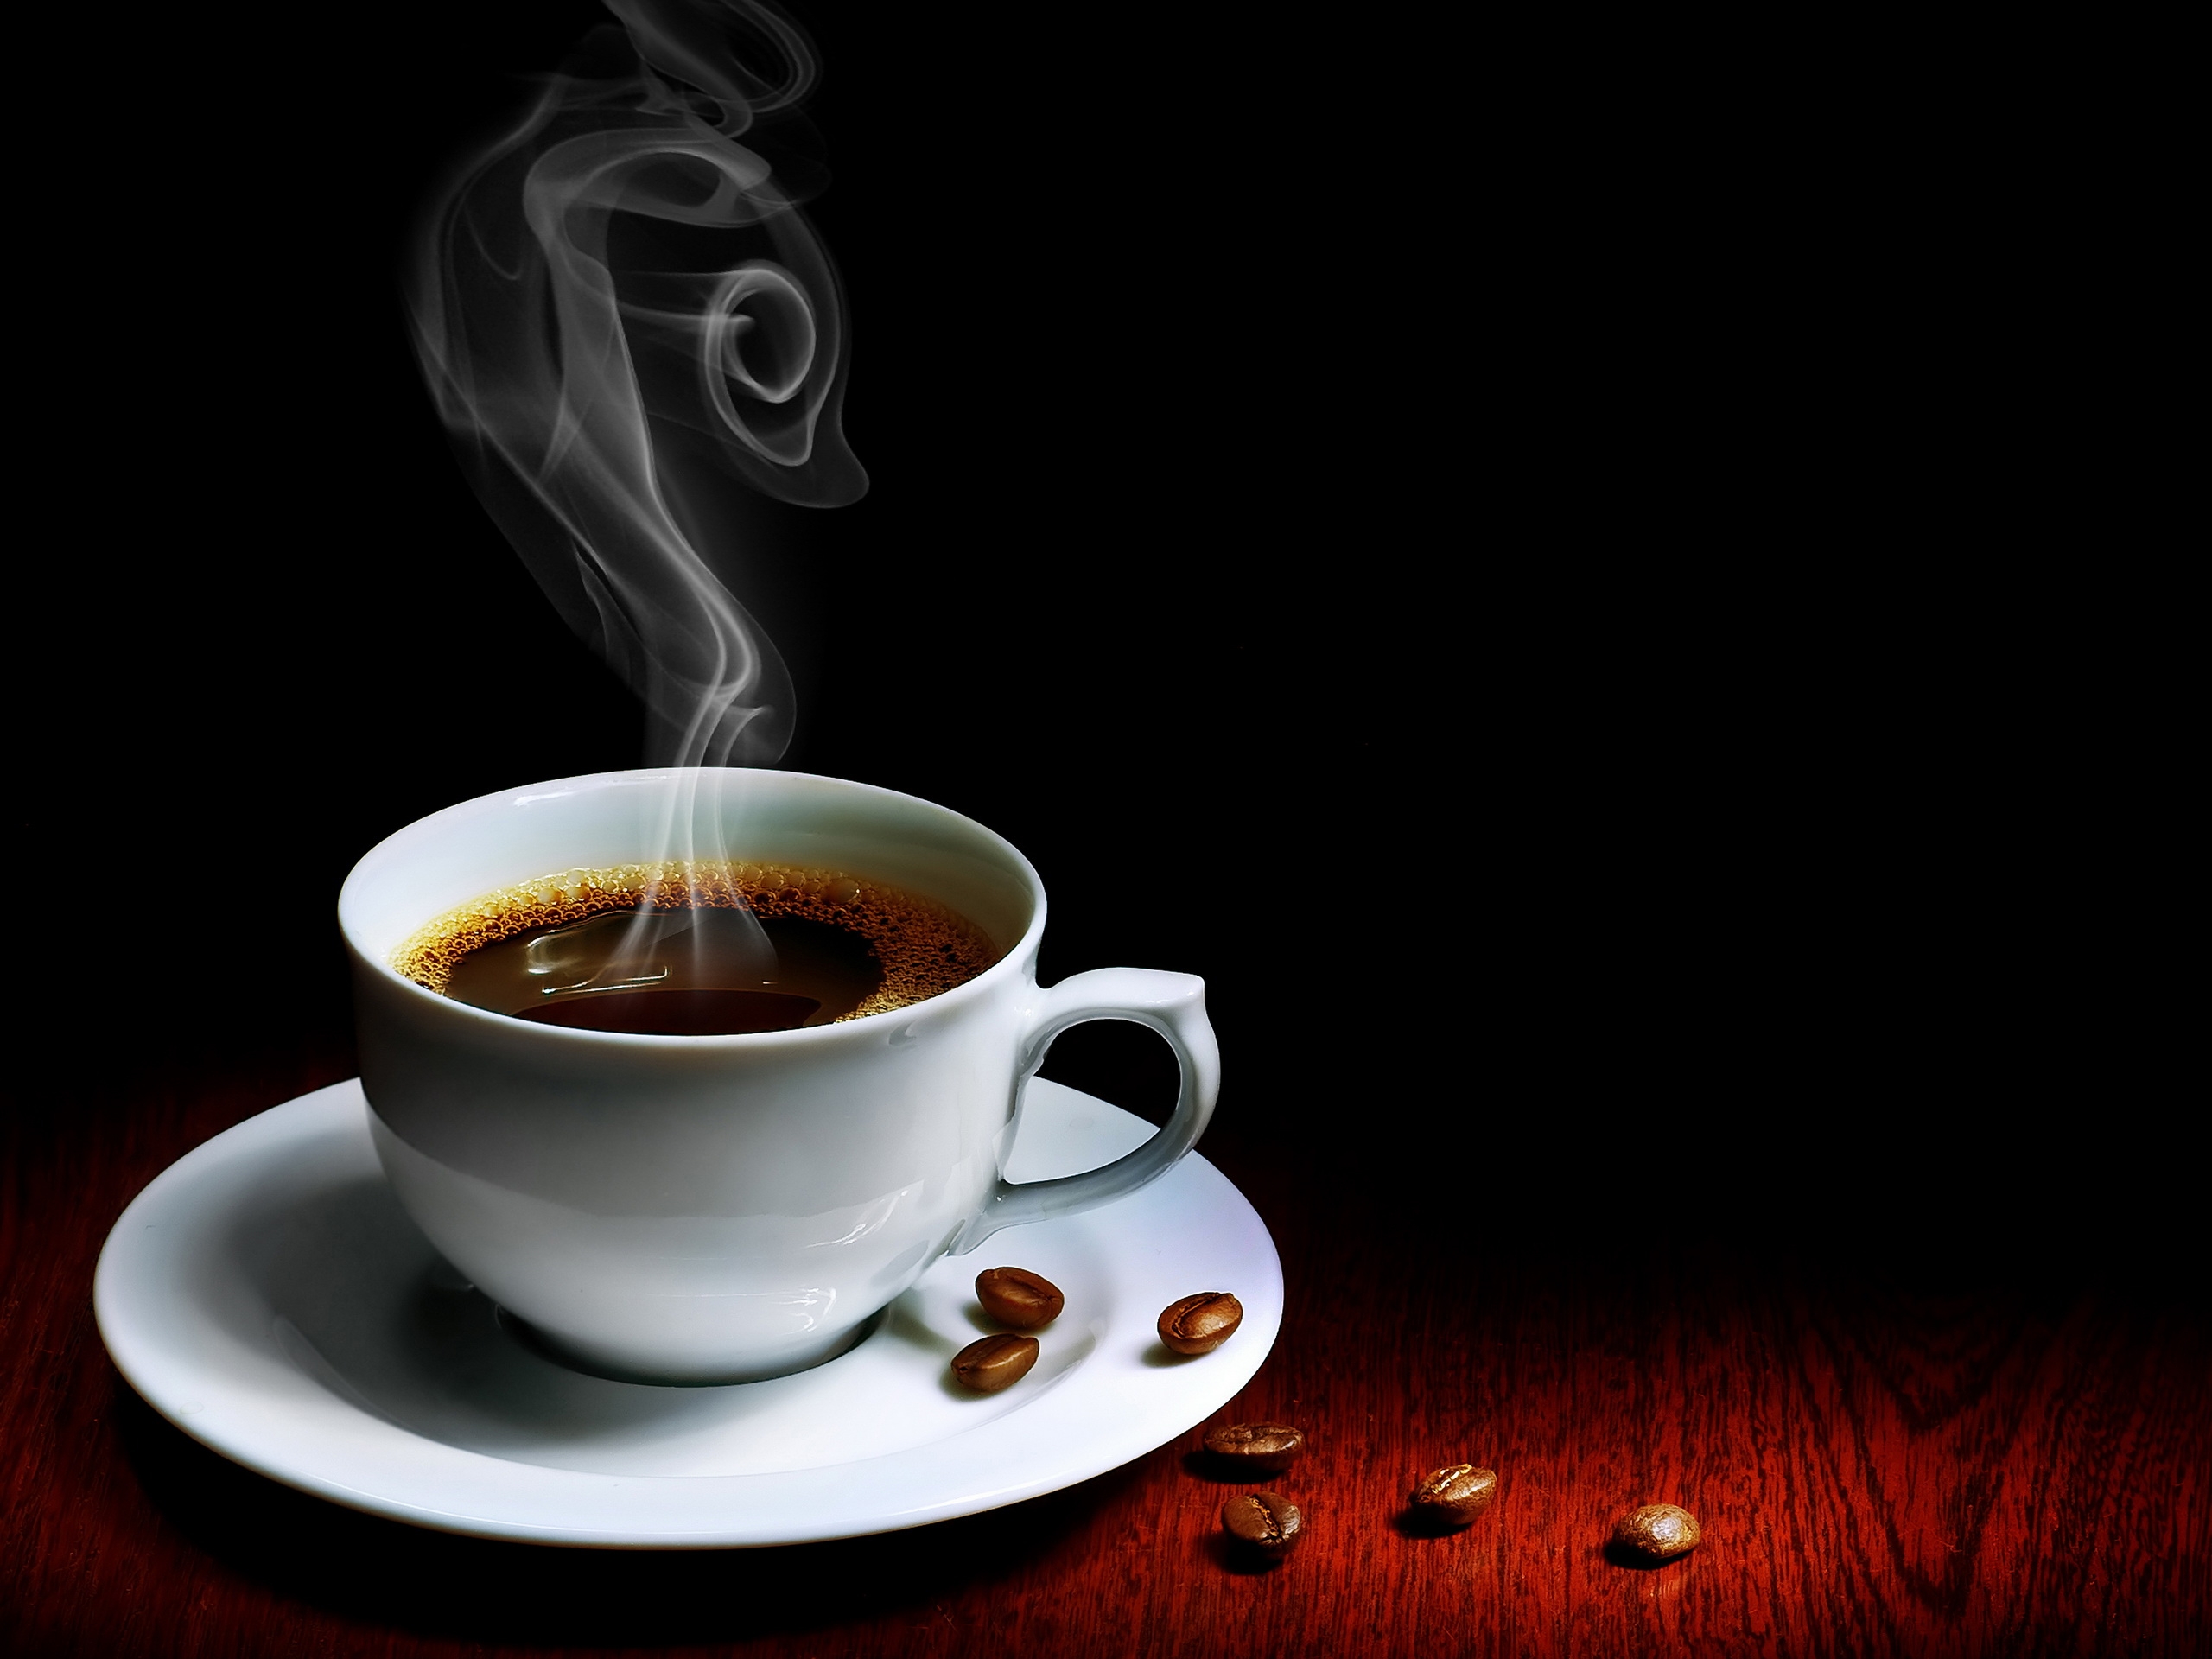 141102 download wallpaper coffee, food, cup, table, grains, steam, grain, hot screensavers and pictures for free